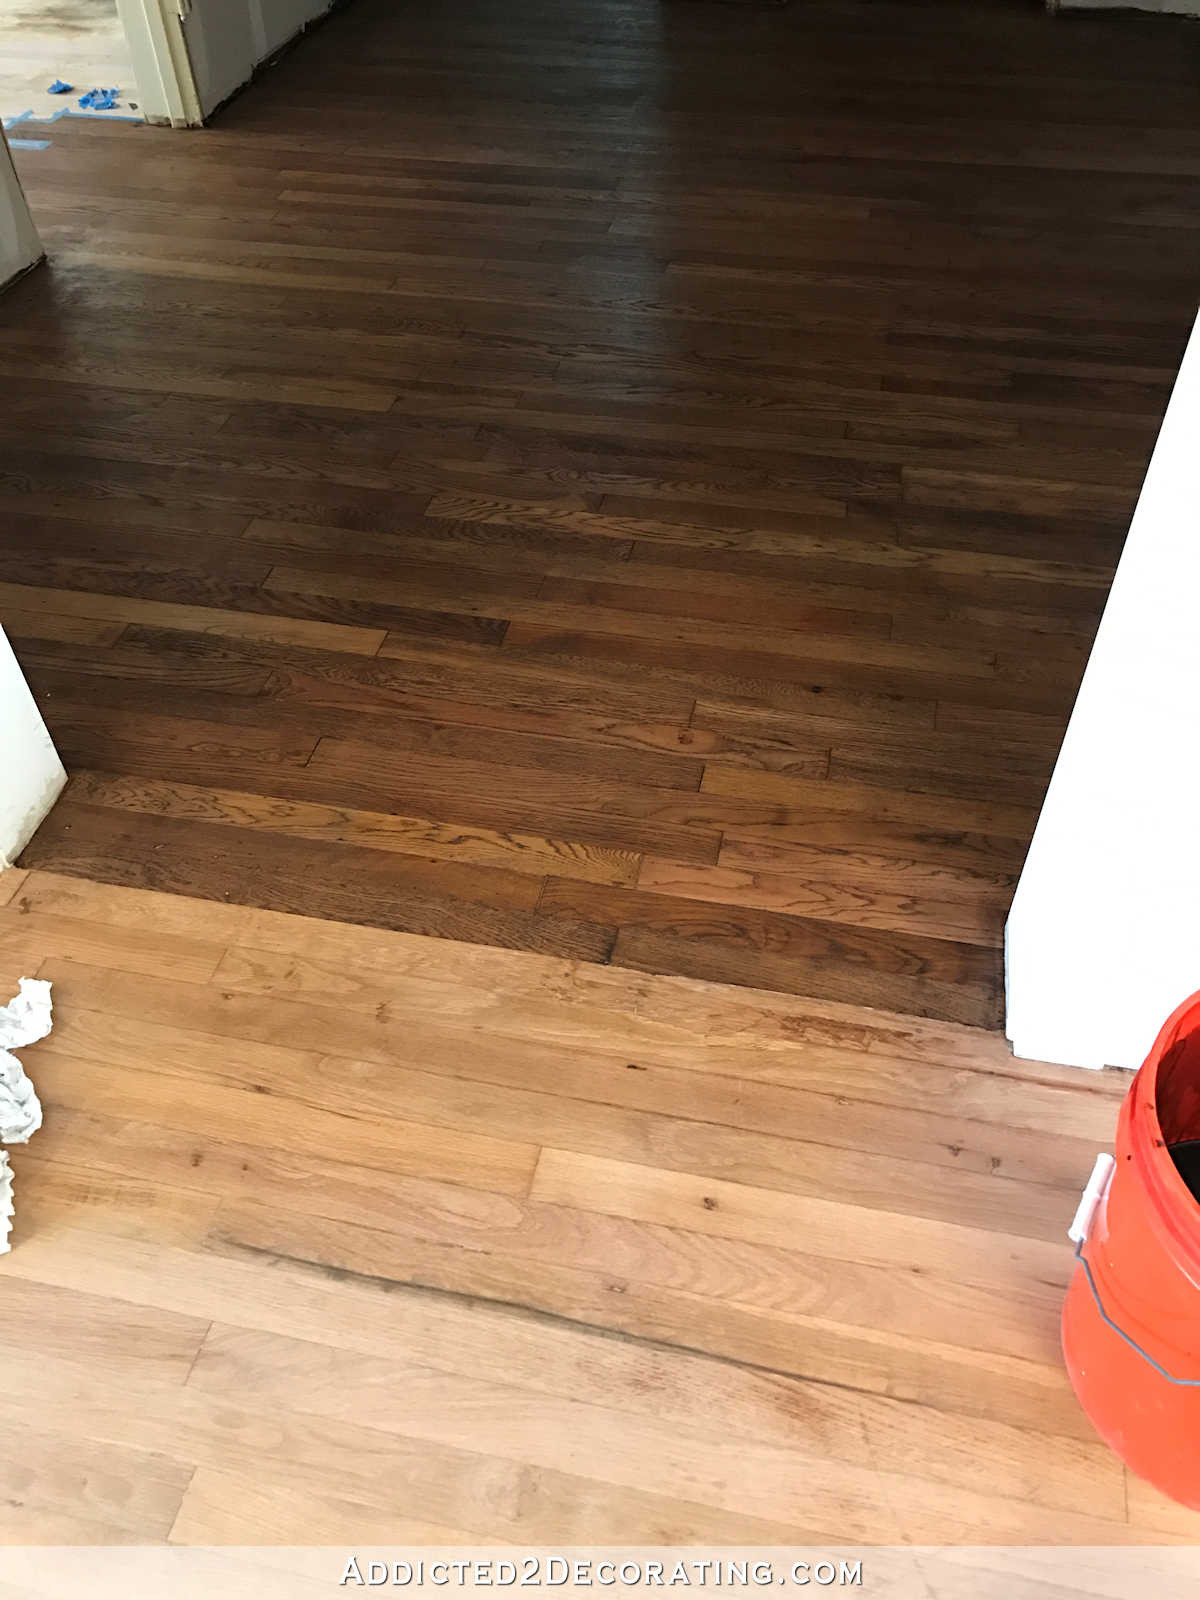 14 Awesome Best Product to Clean Hardwood Floors 2024 free download best product to clean hardwood floors of adventures in staining my red oak hardwood floors products process within staining red oak hardwood floors 2 tape off one section at a time for